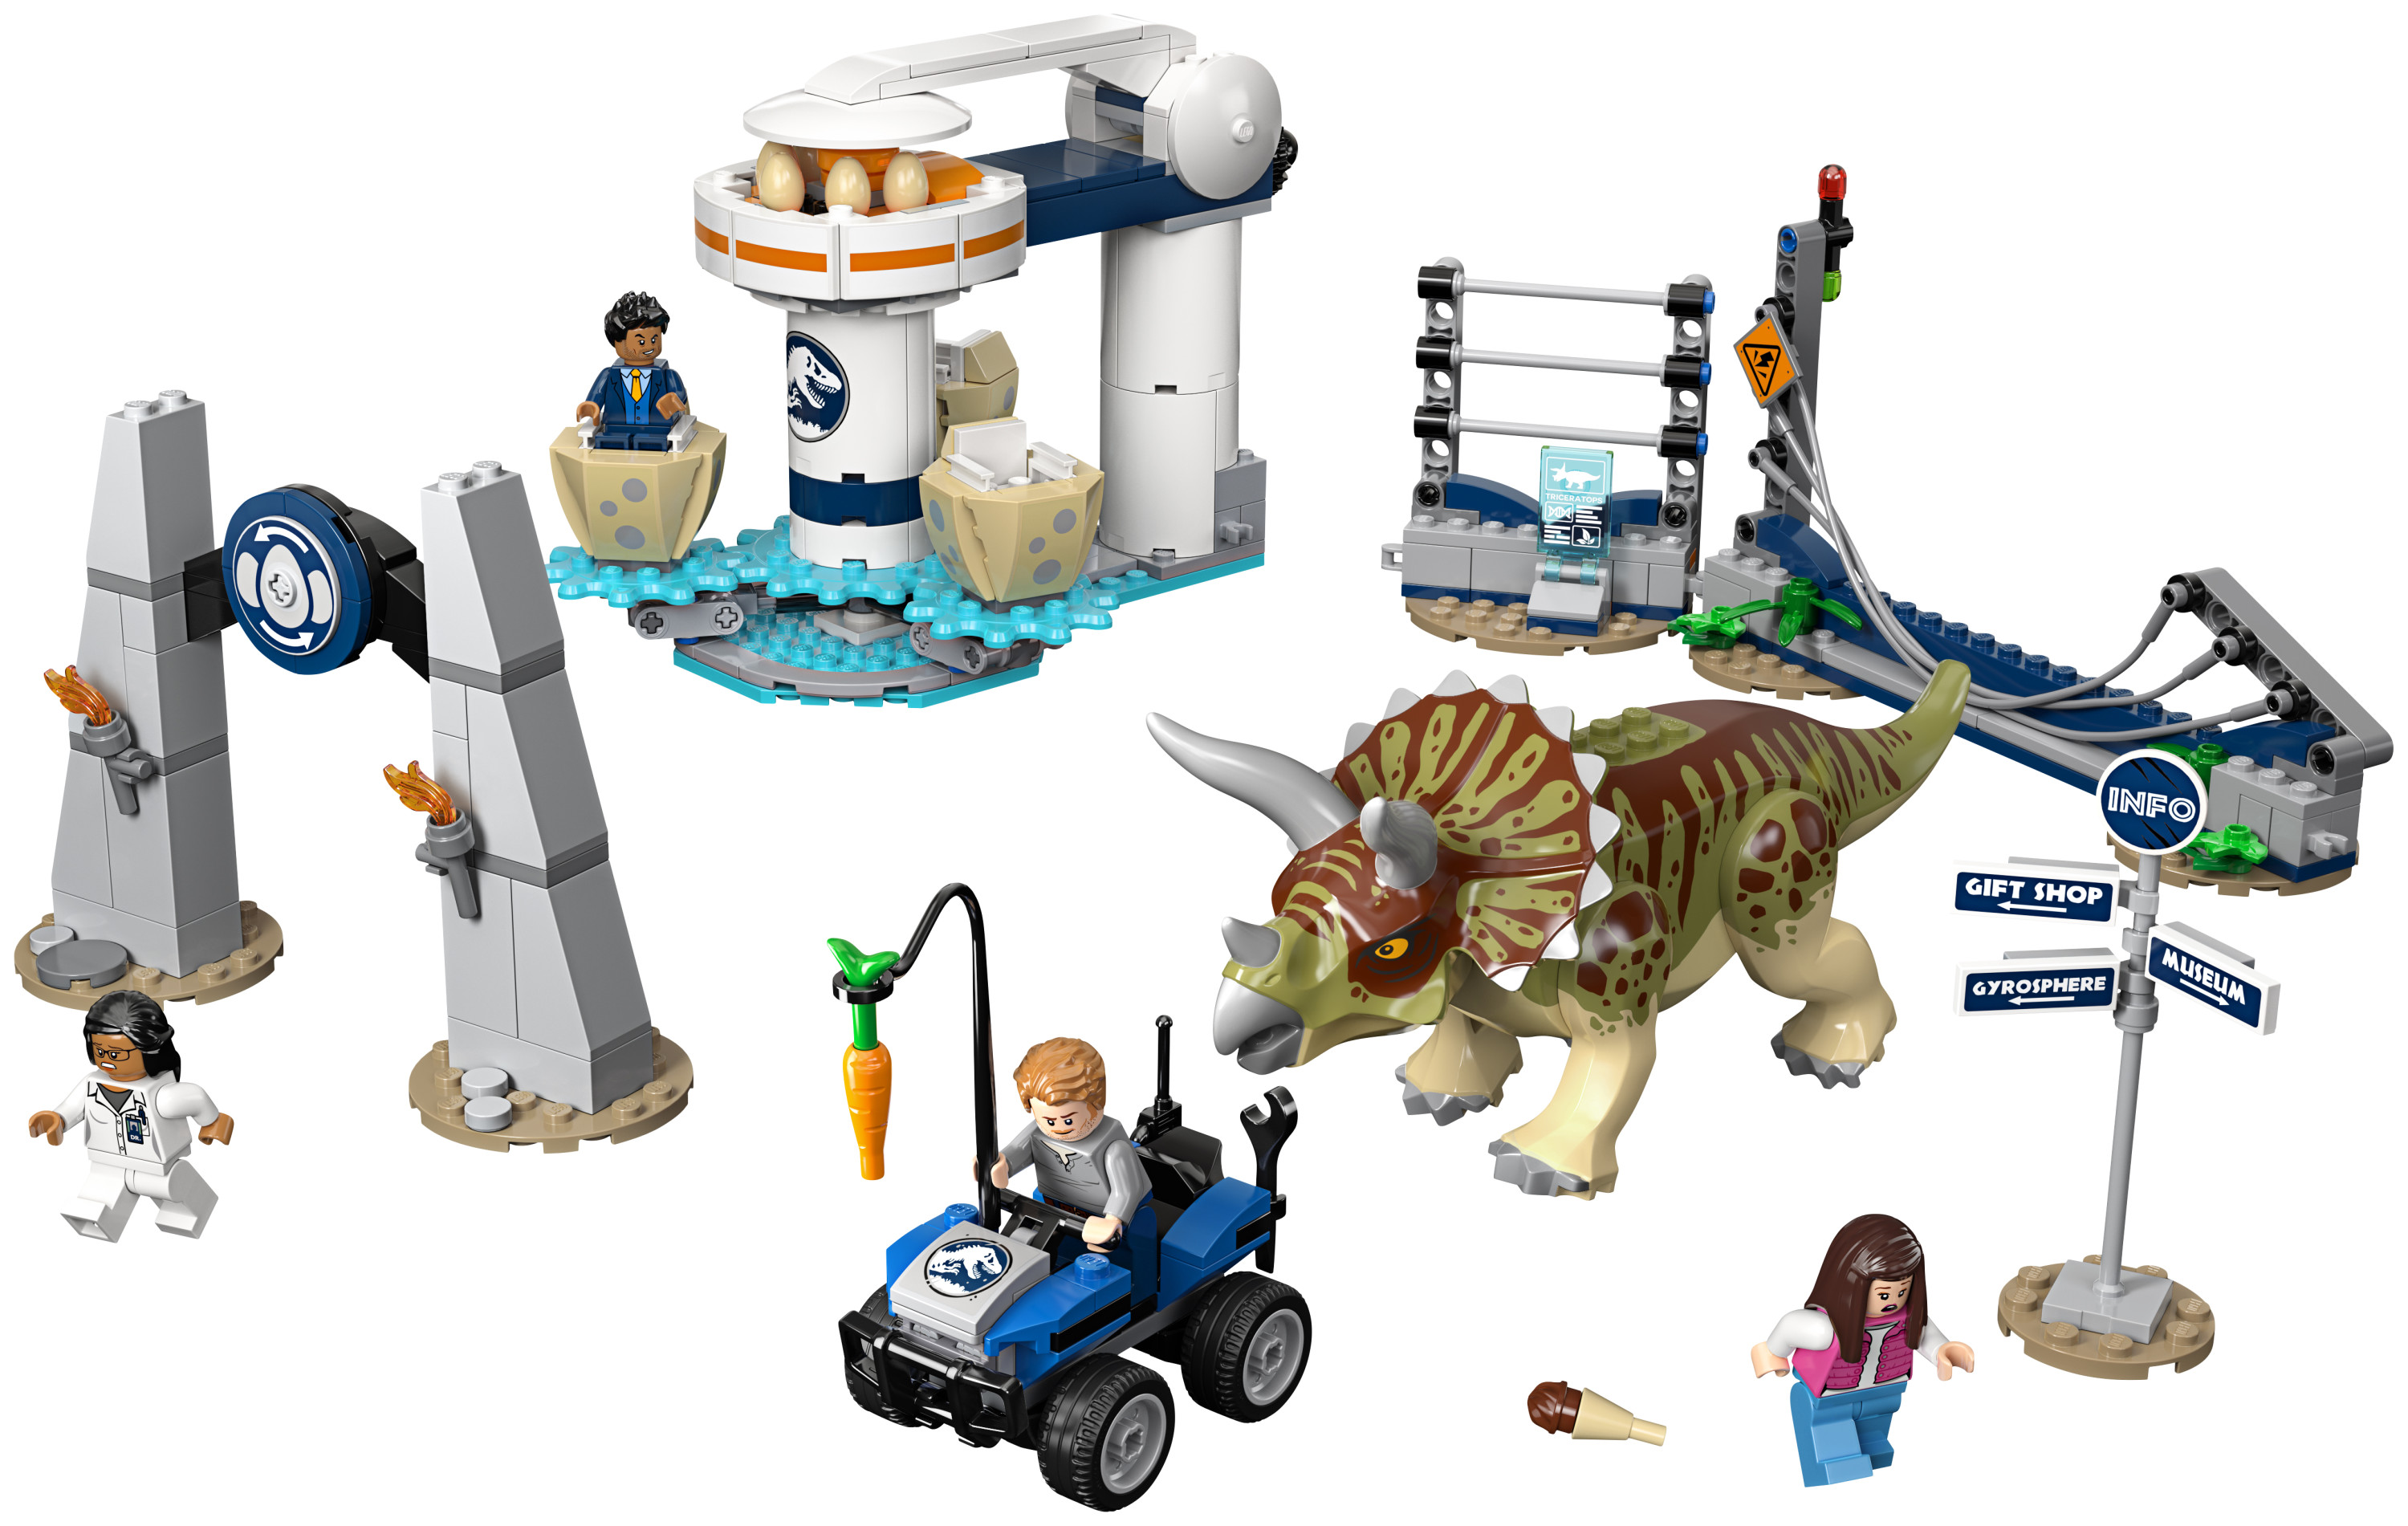 LEGO Jurassic World Triceratops Rampage 75937 ATV Motorcycle Model Dinosaur Figure Building Toy (447 Pieces) - image 3 of 6